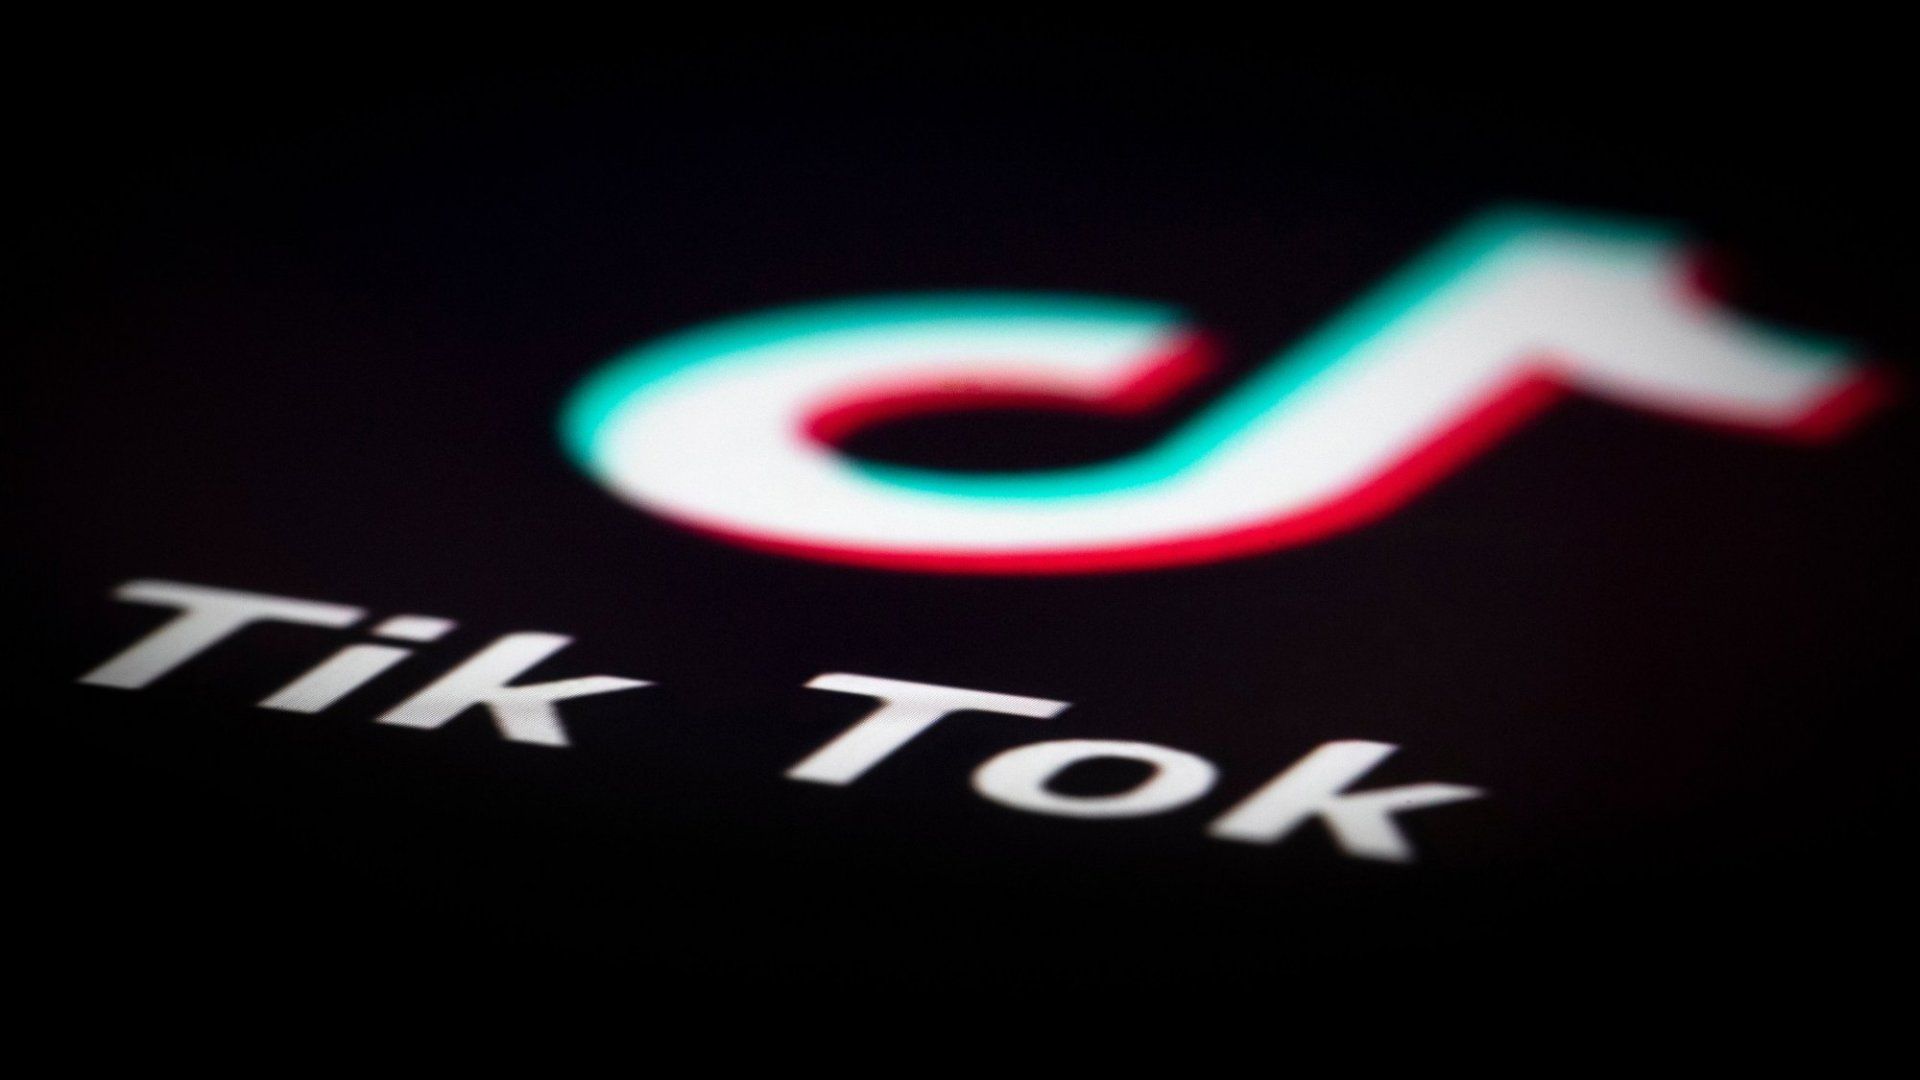 The Department of Defense Is Warning People Not to Use TikTok Over National Security Concerns